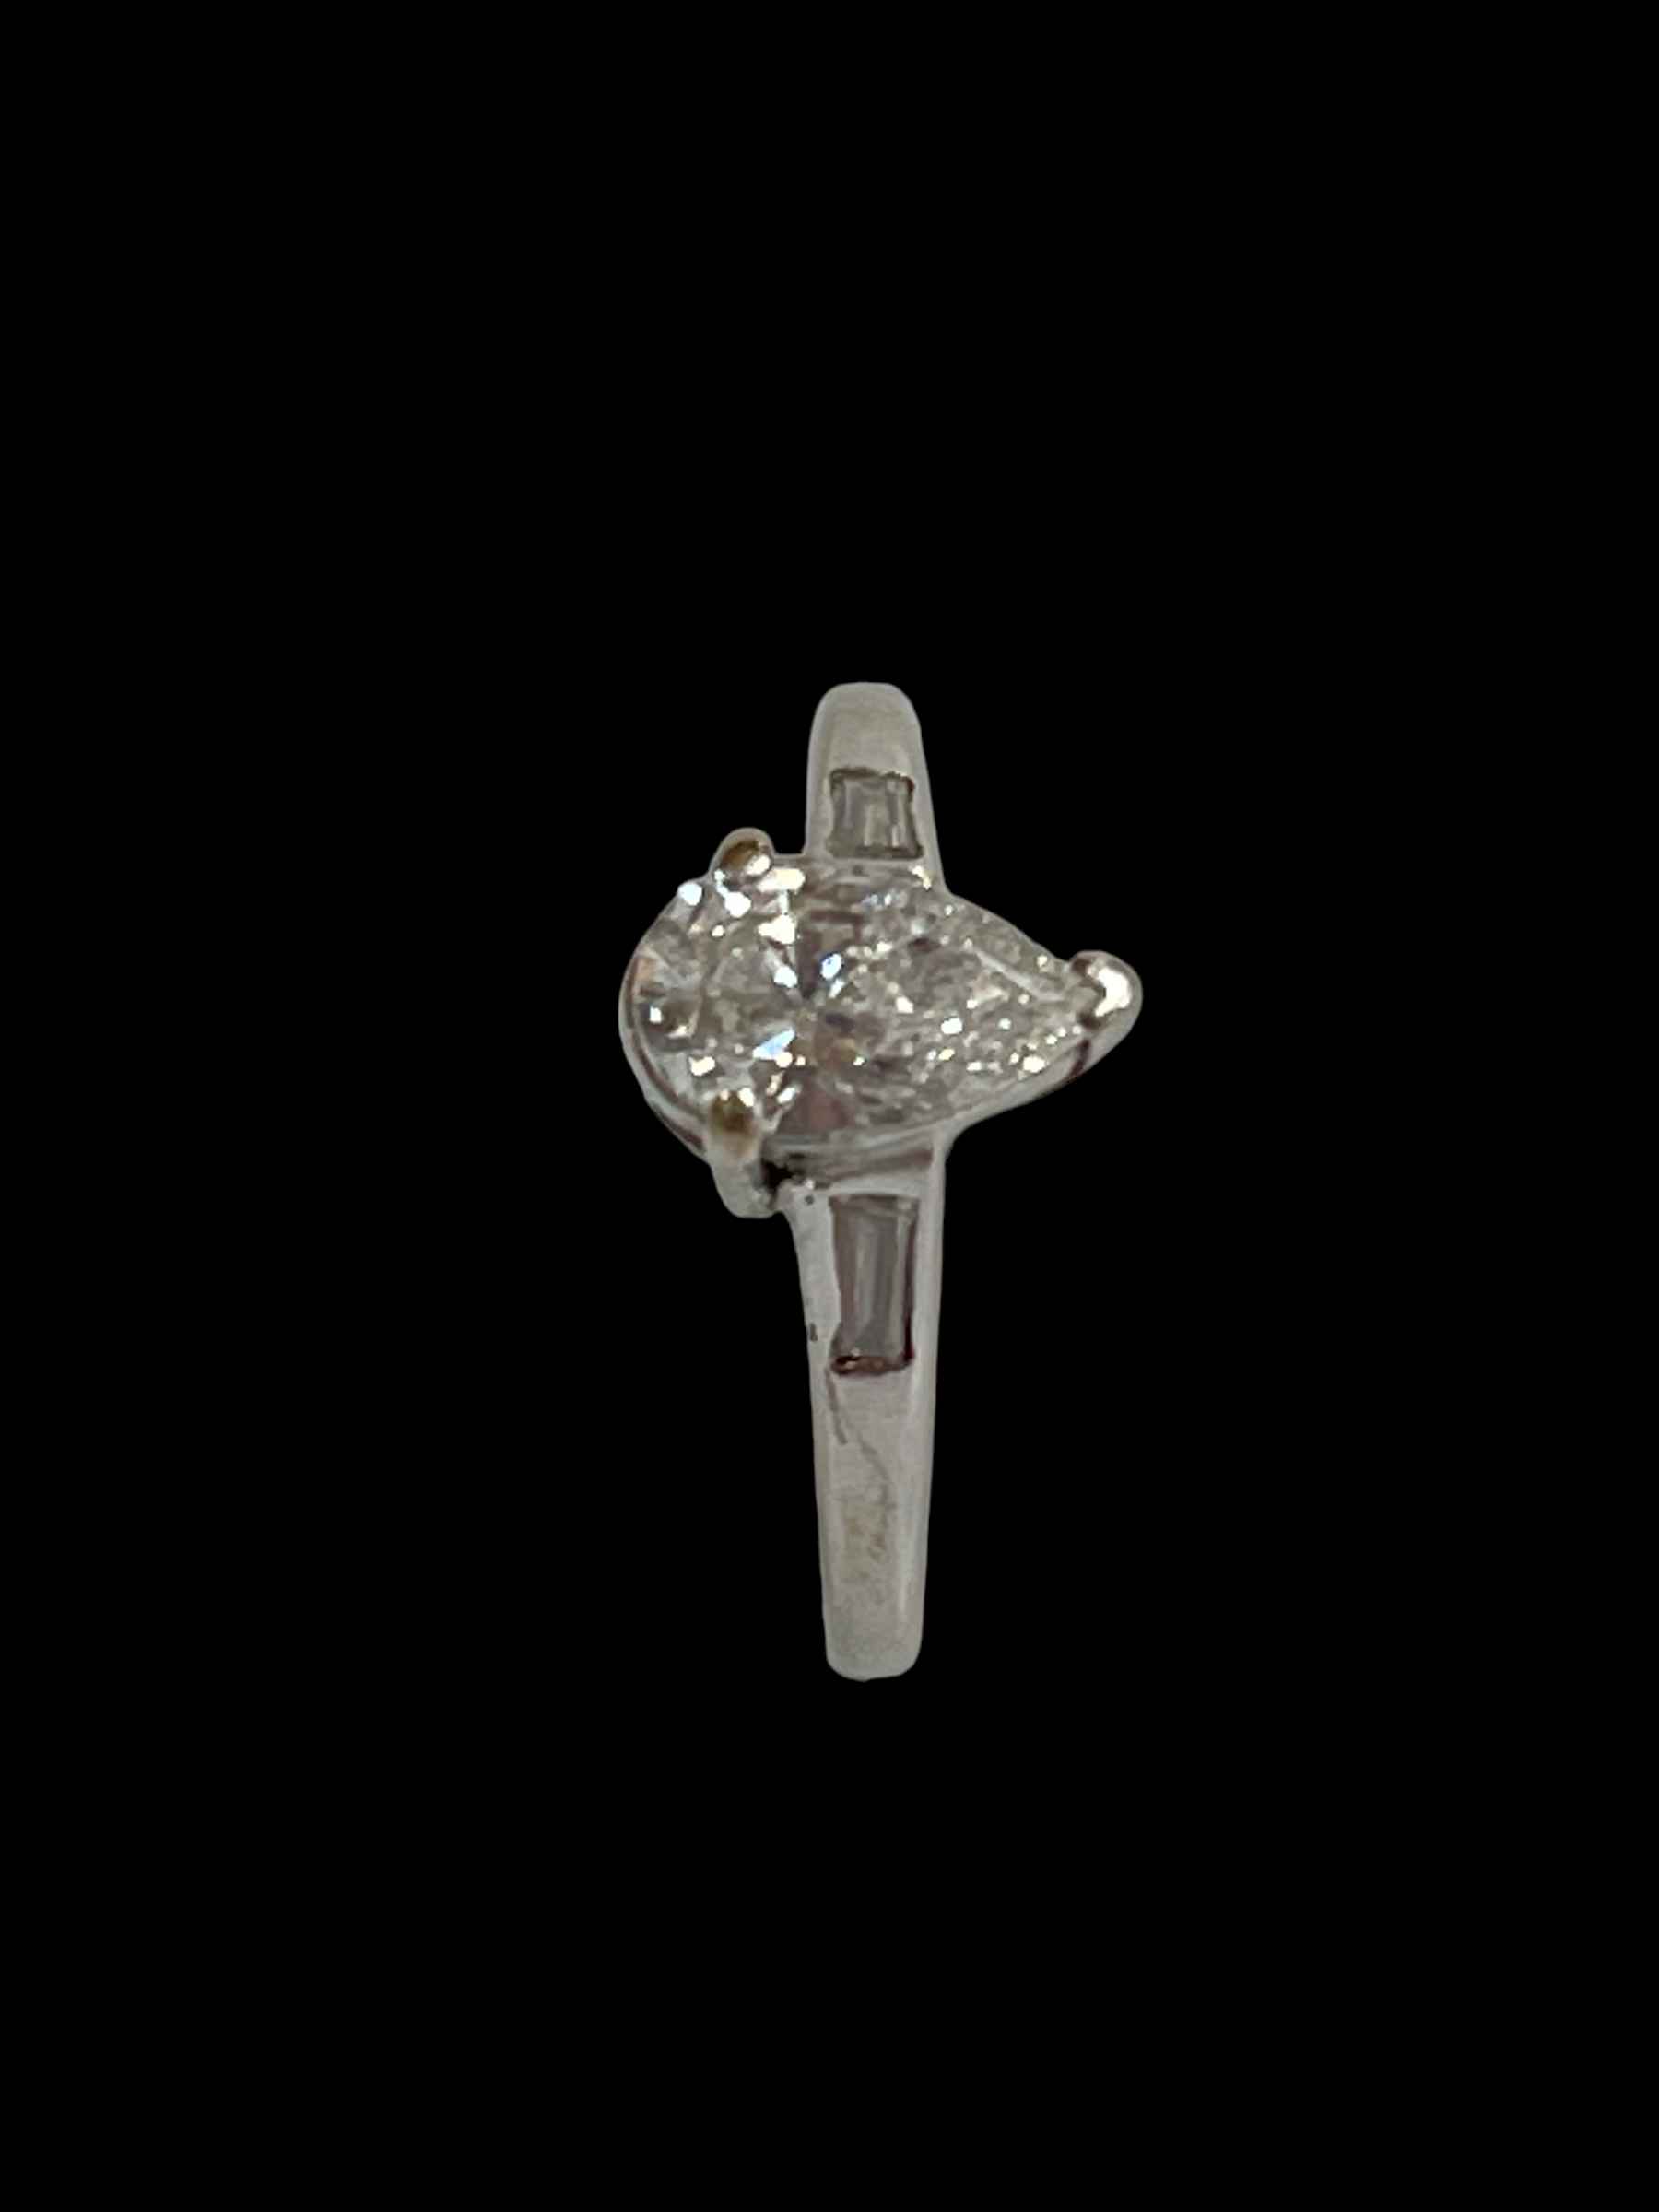 Diamond tear drop 18 carat white gold ring, size N, together with 18 carat white gold wedding band, - Image 2 of 2